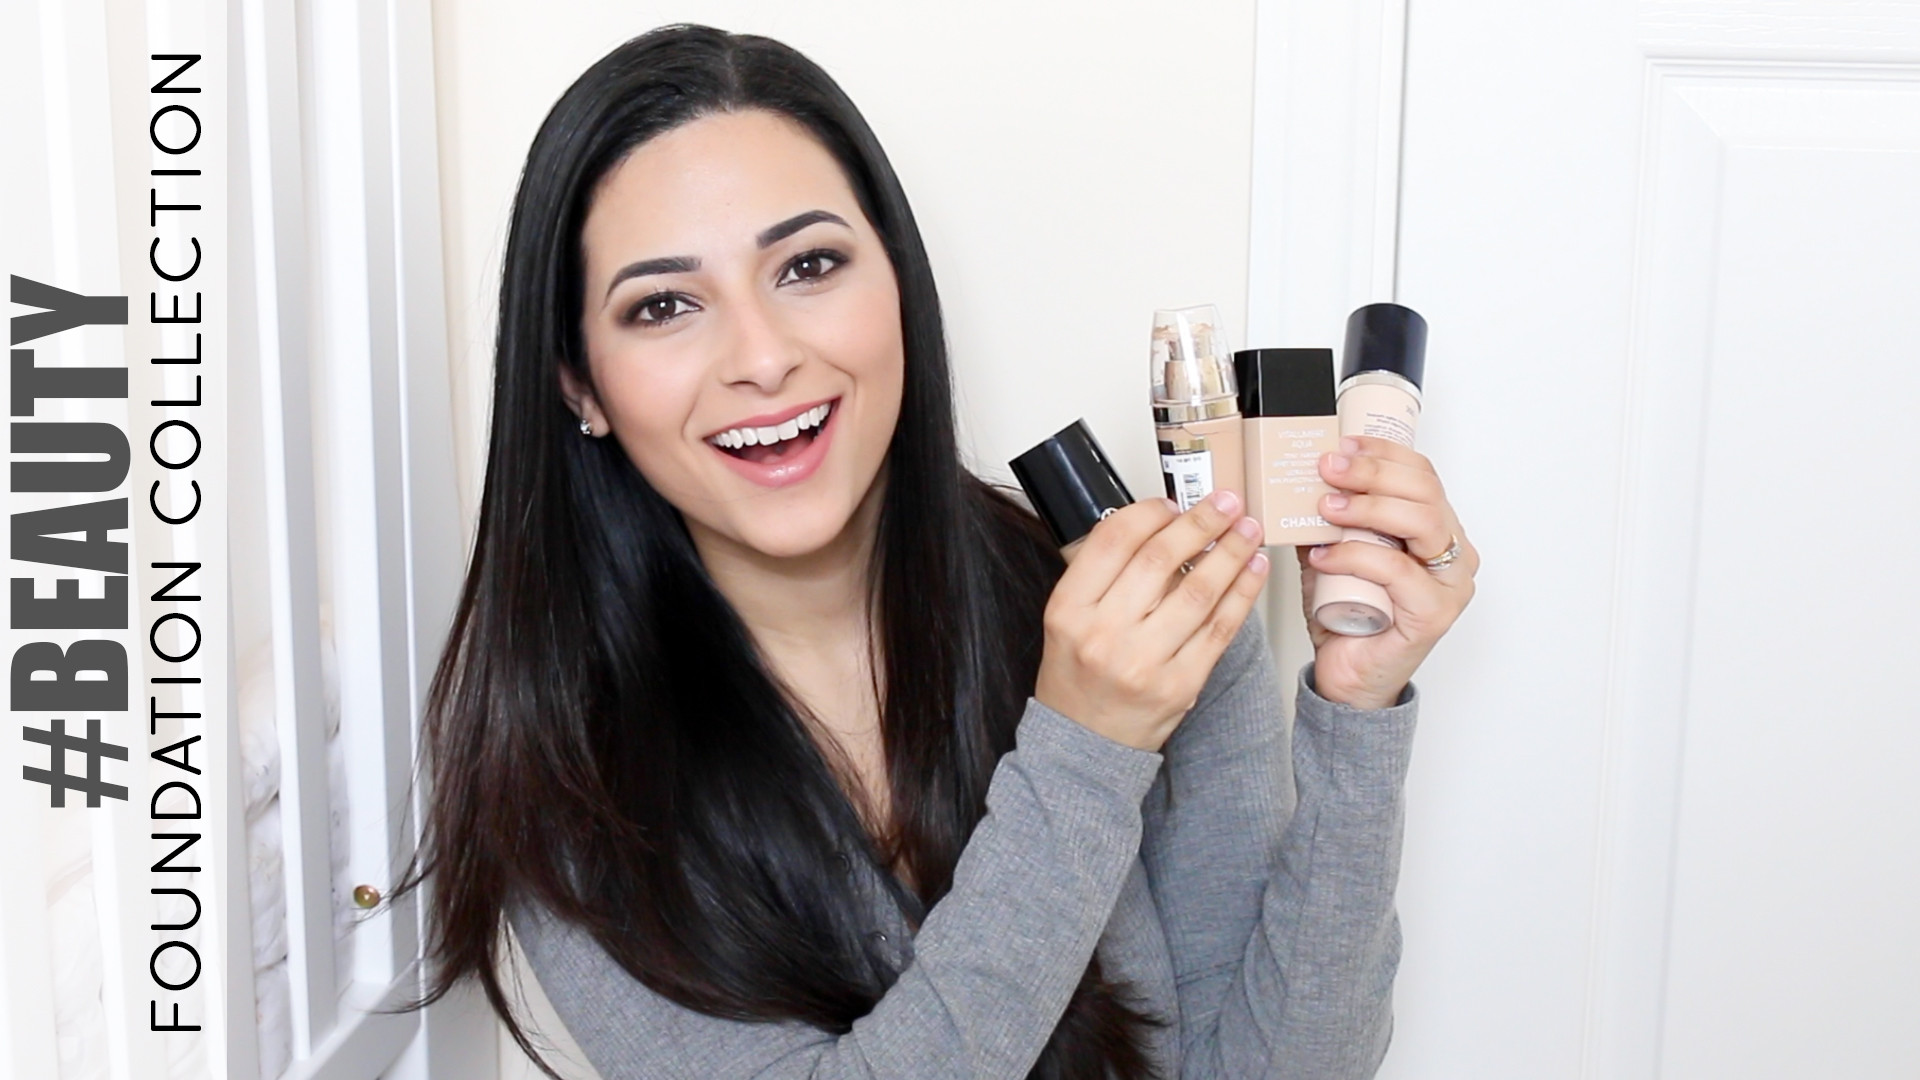 Foundation Collection 2016 Dry Skin Video Reviews - www.ysislorenna.com